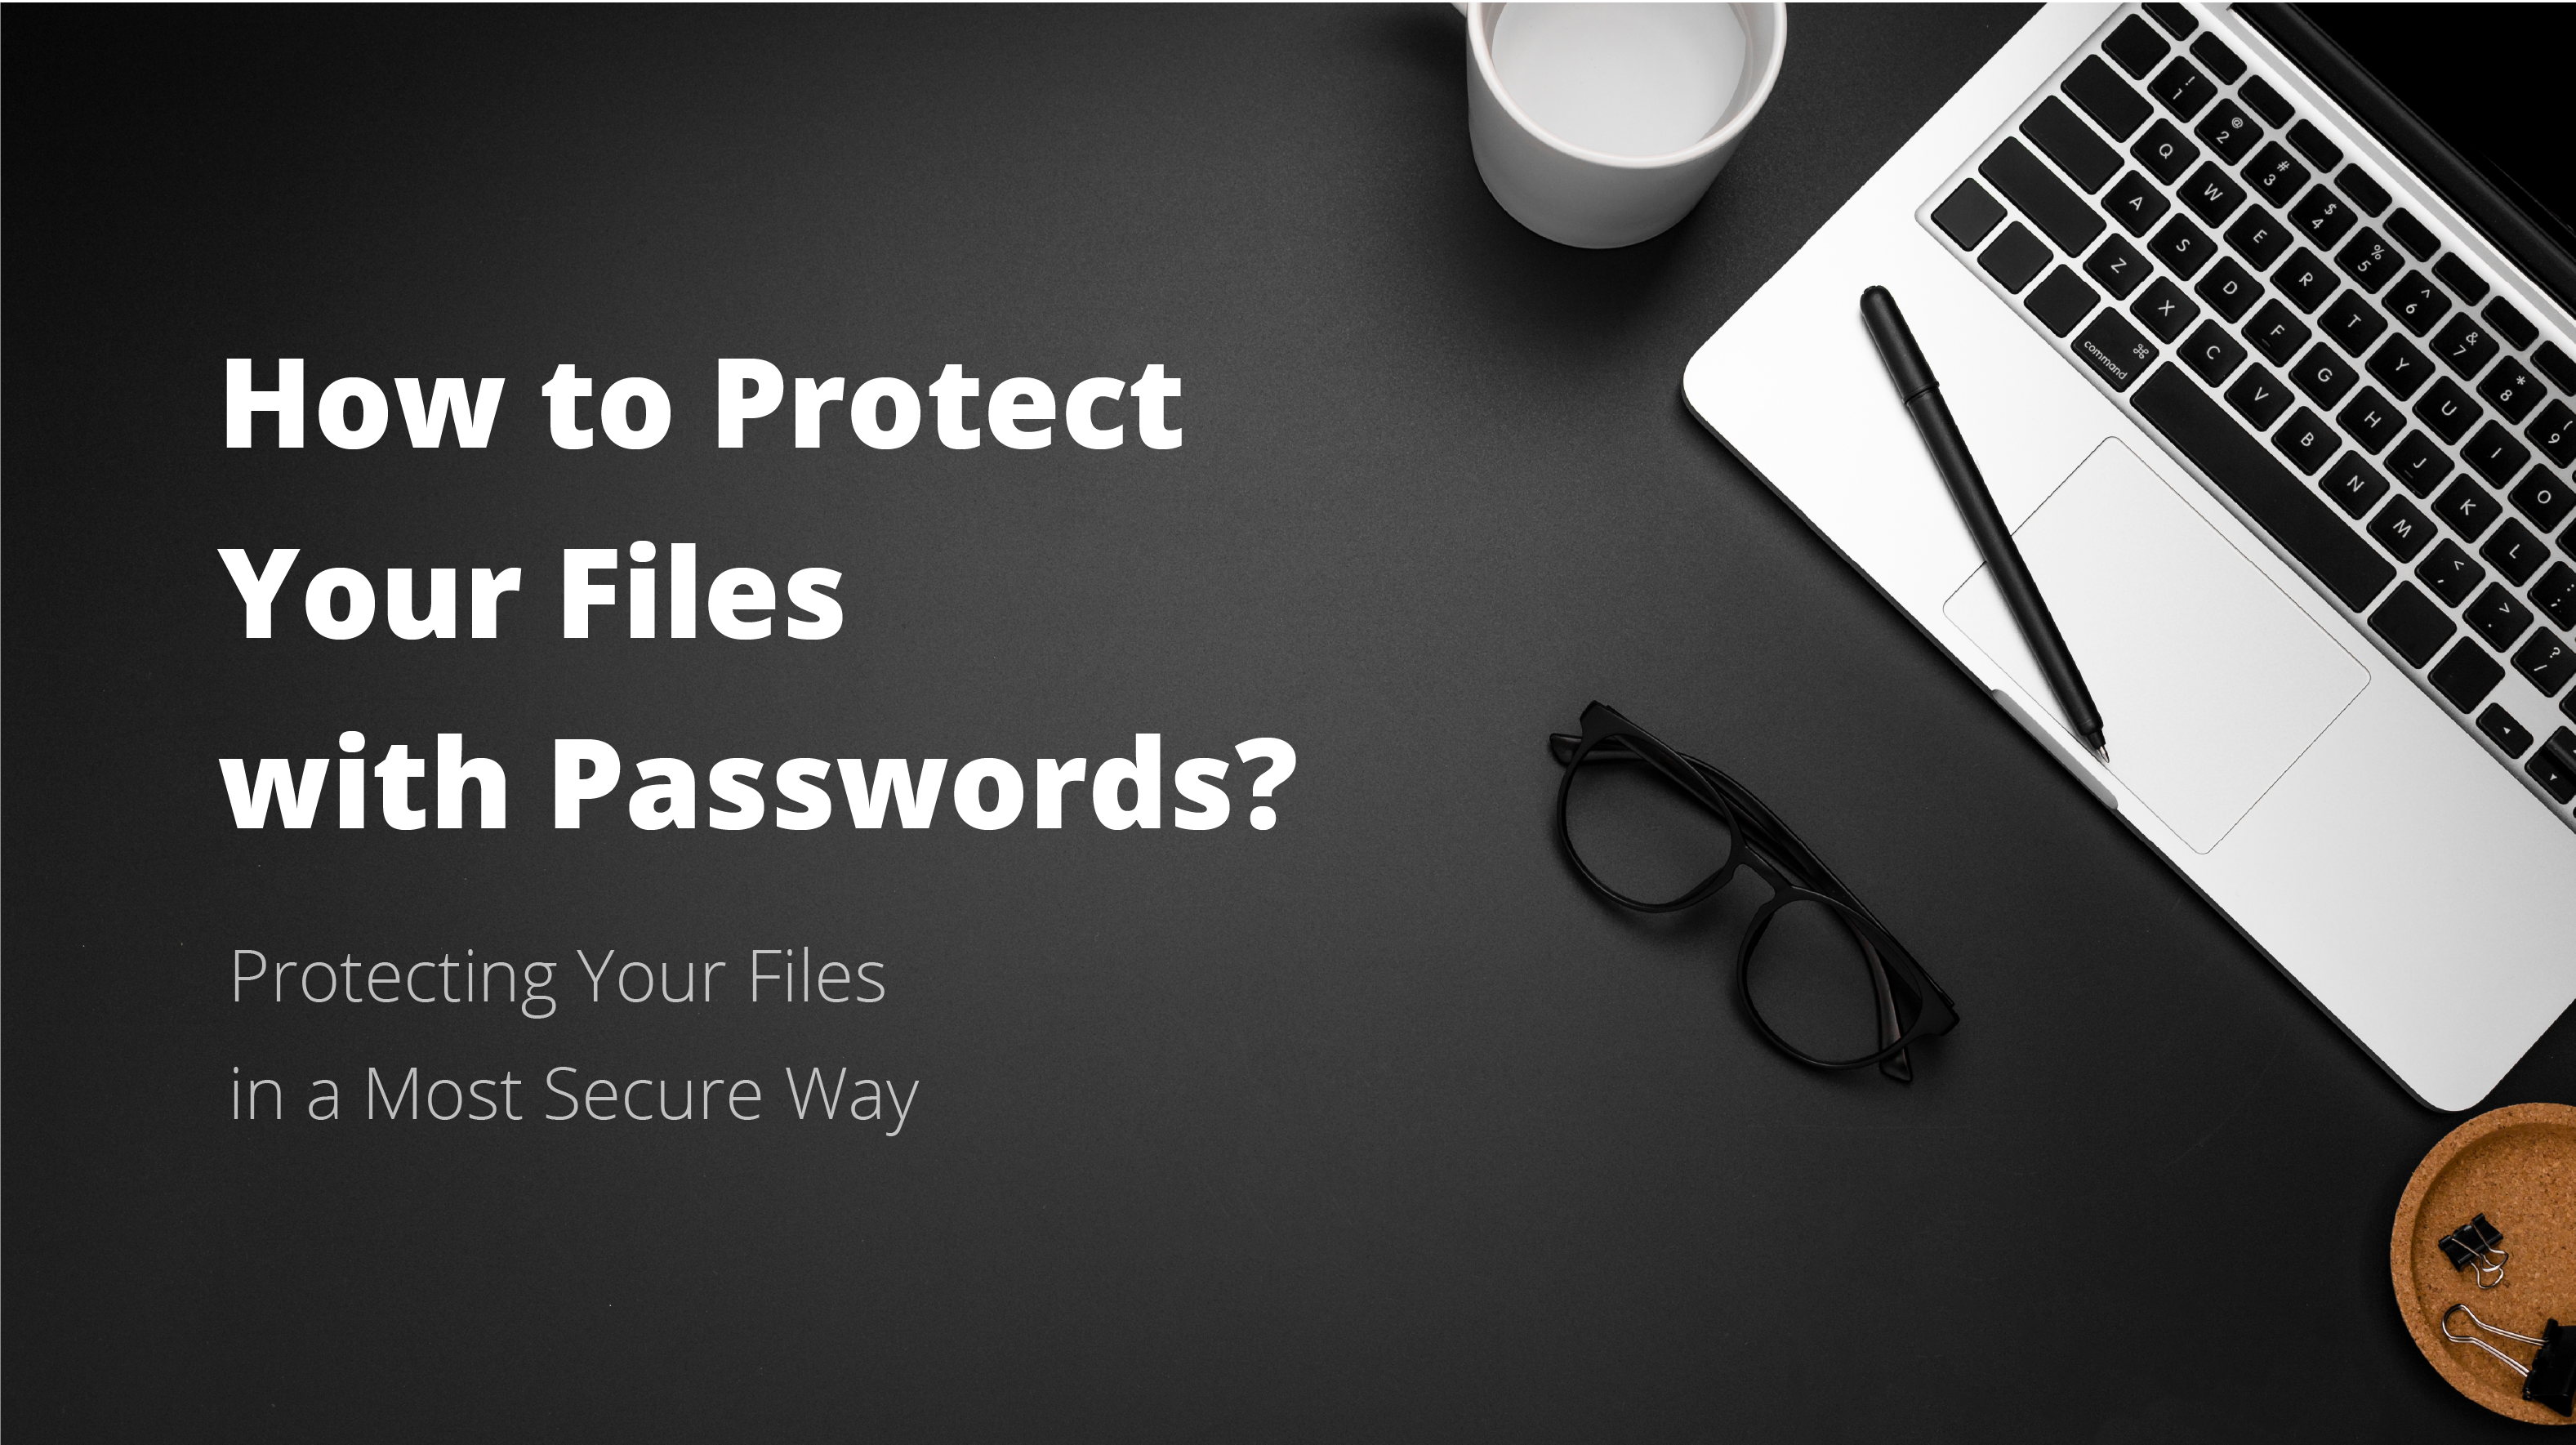 How to Protect Files with Passwords?